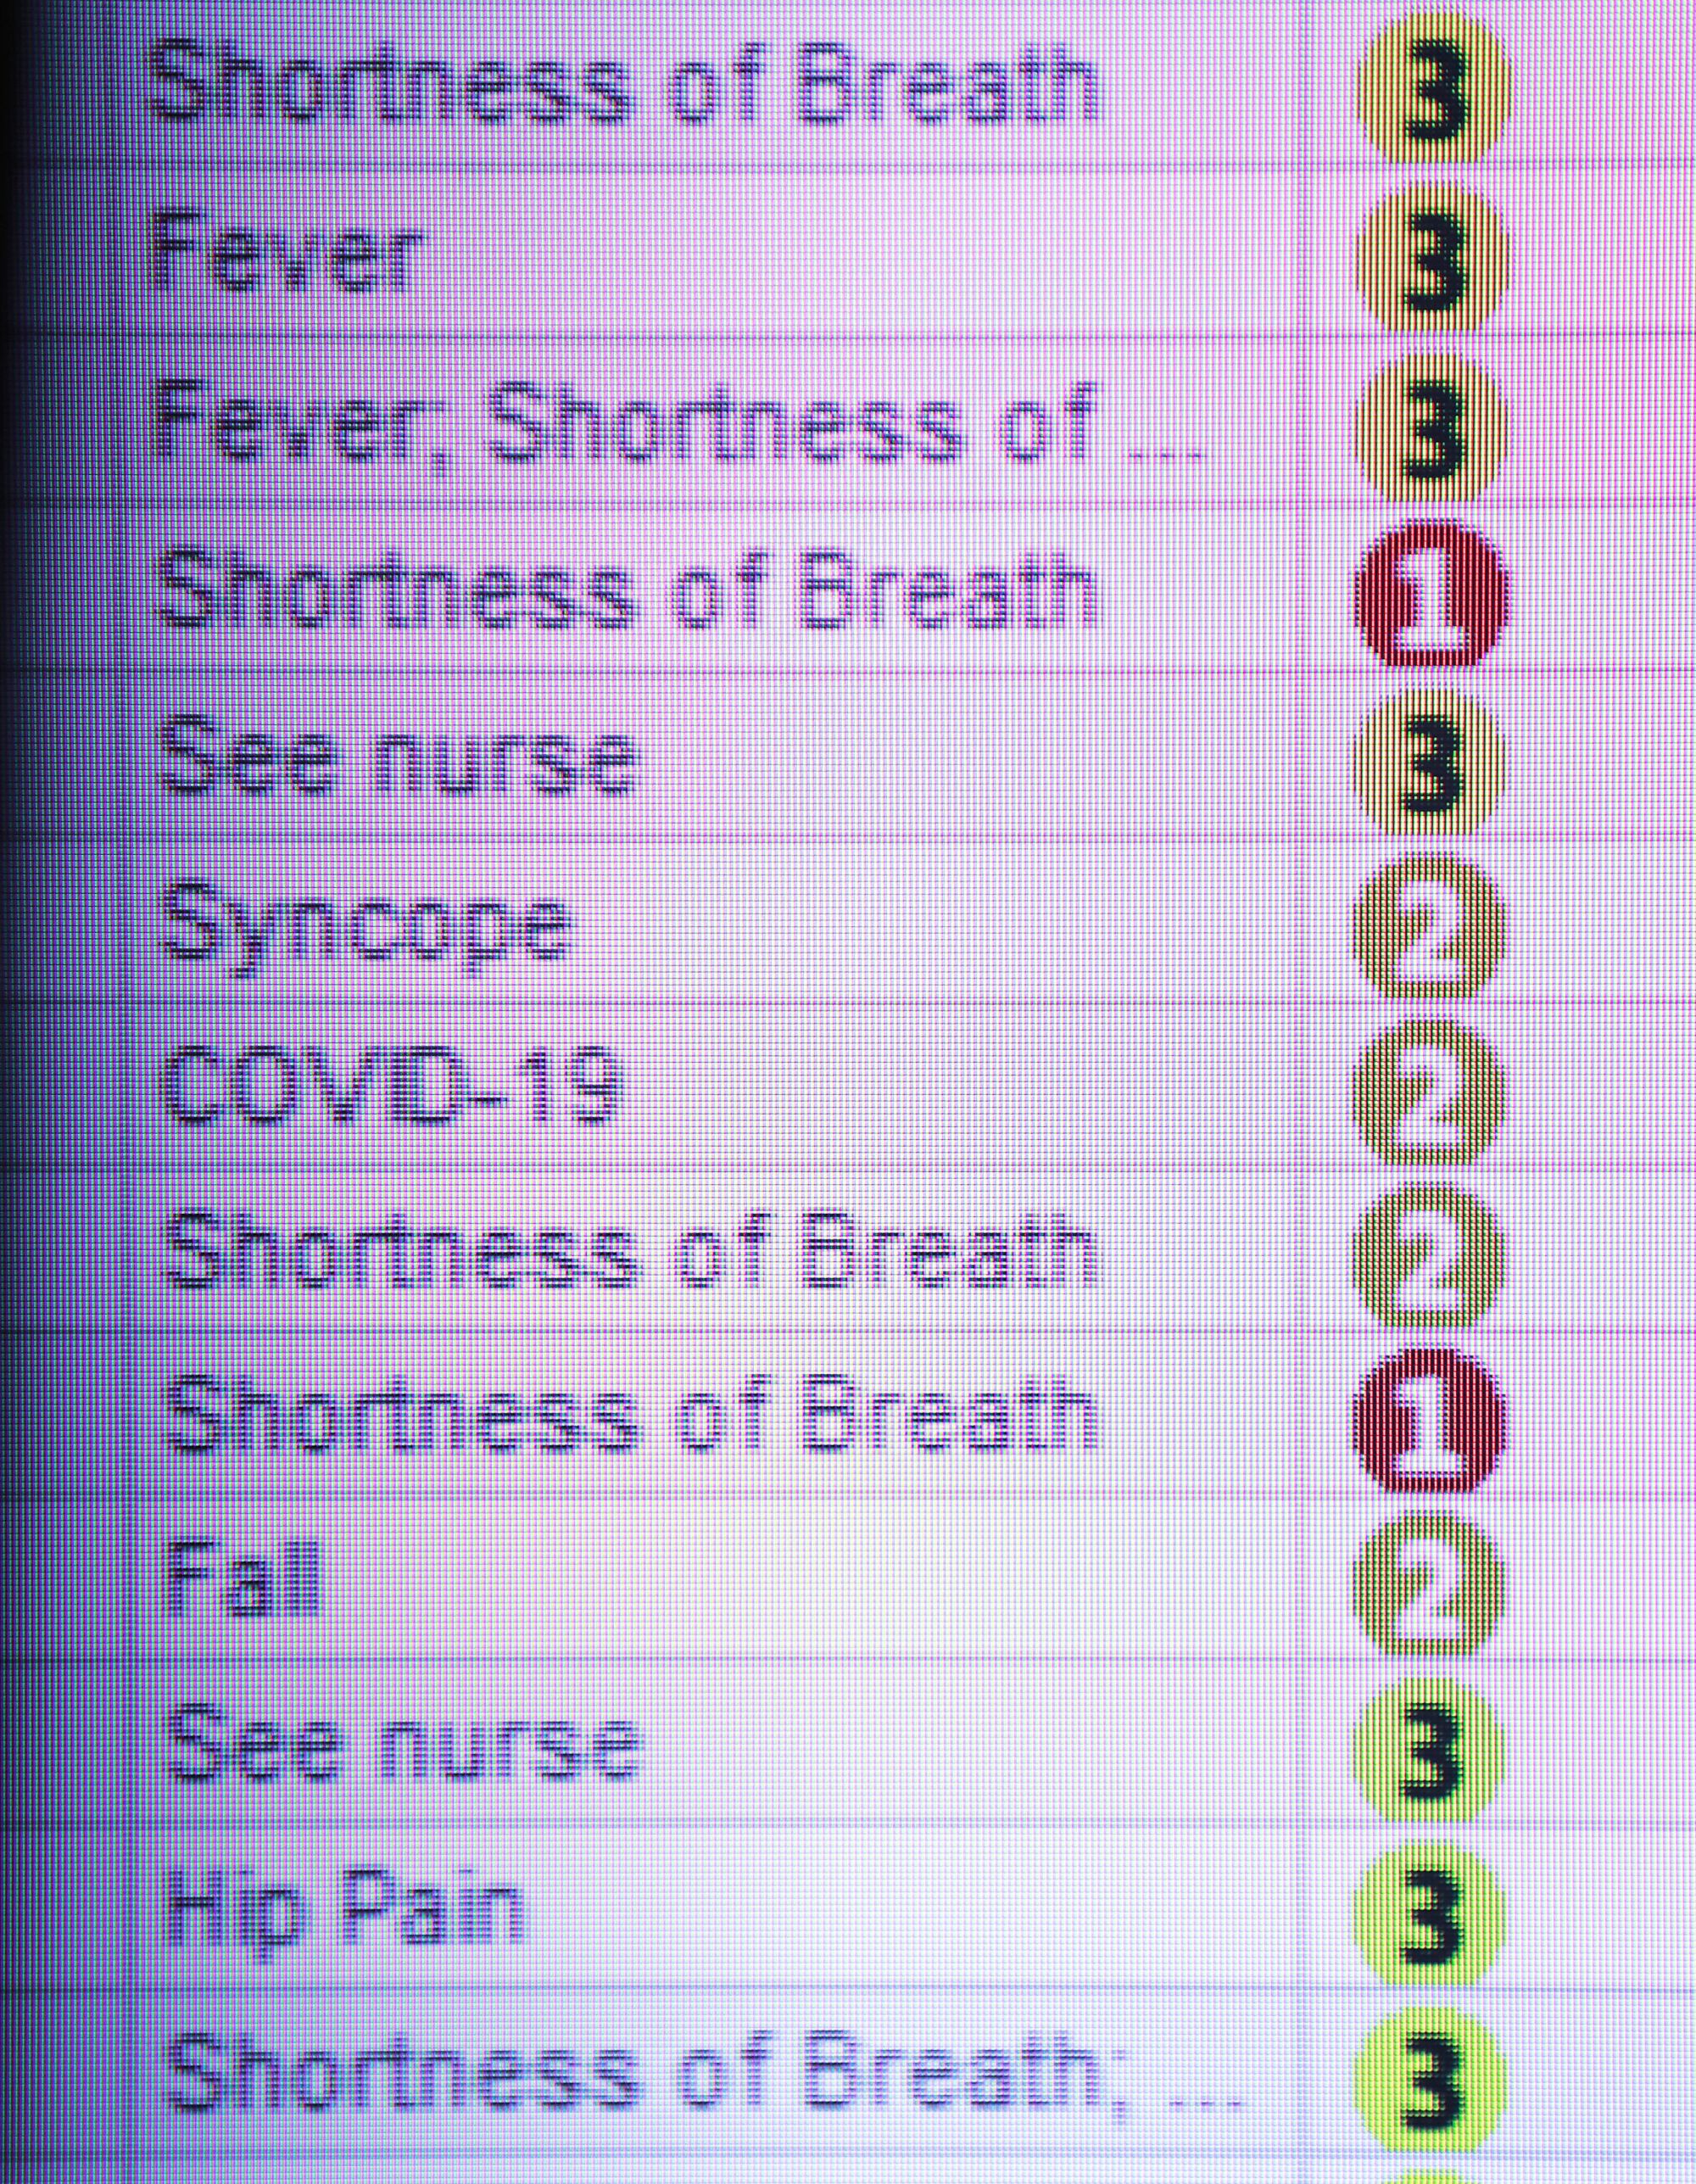 A monitor shows the symptoms of patients in the emergency room at Scripps Memorial Hospital La Jolla on Jan. 3.